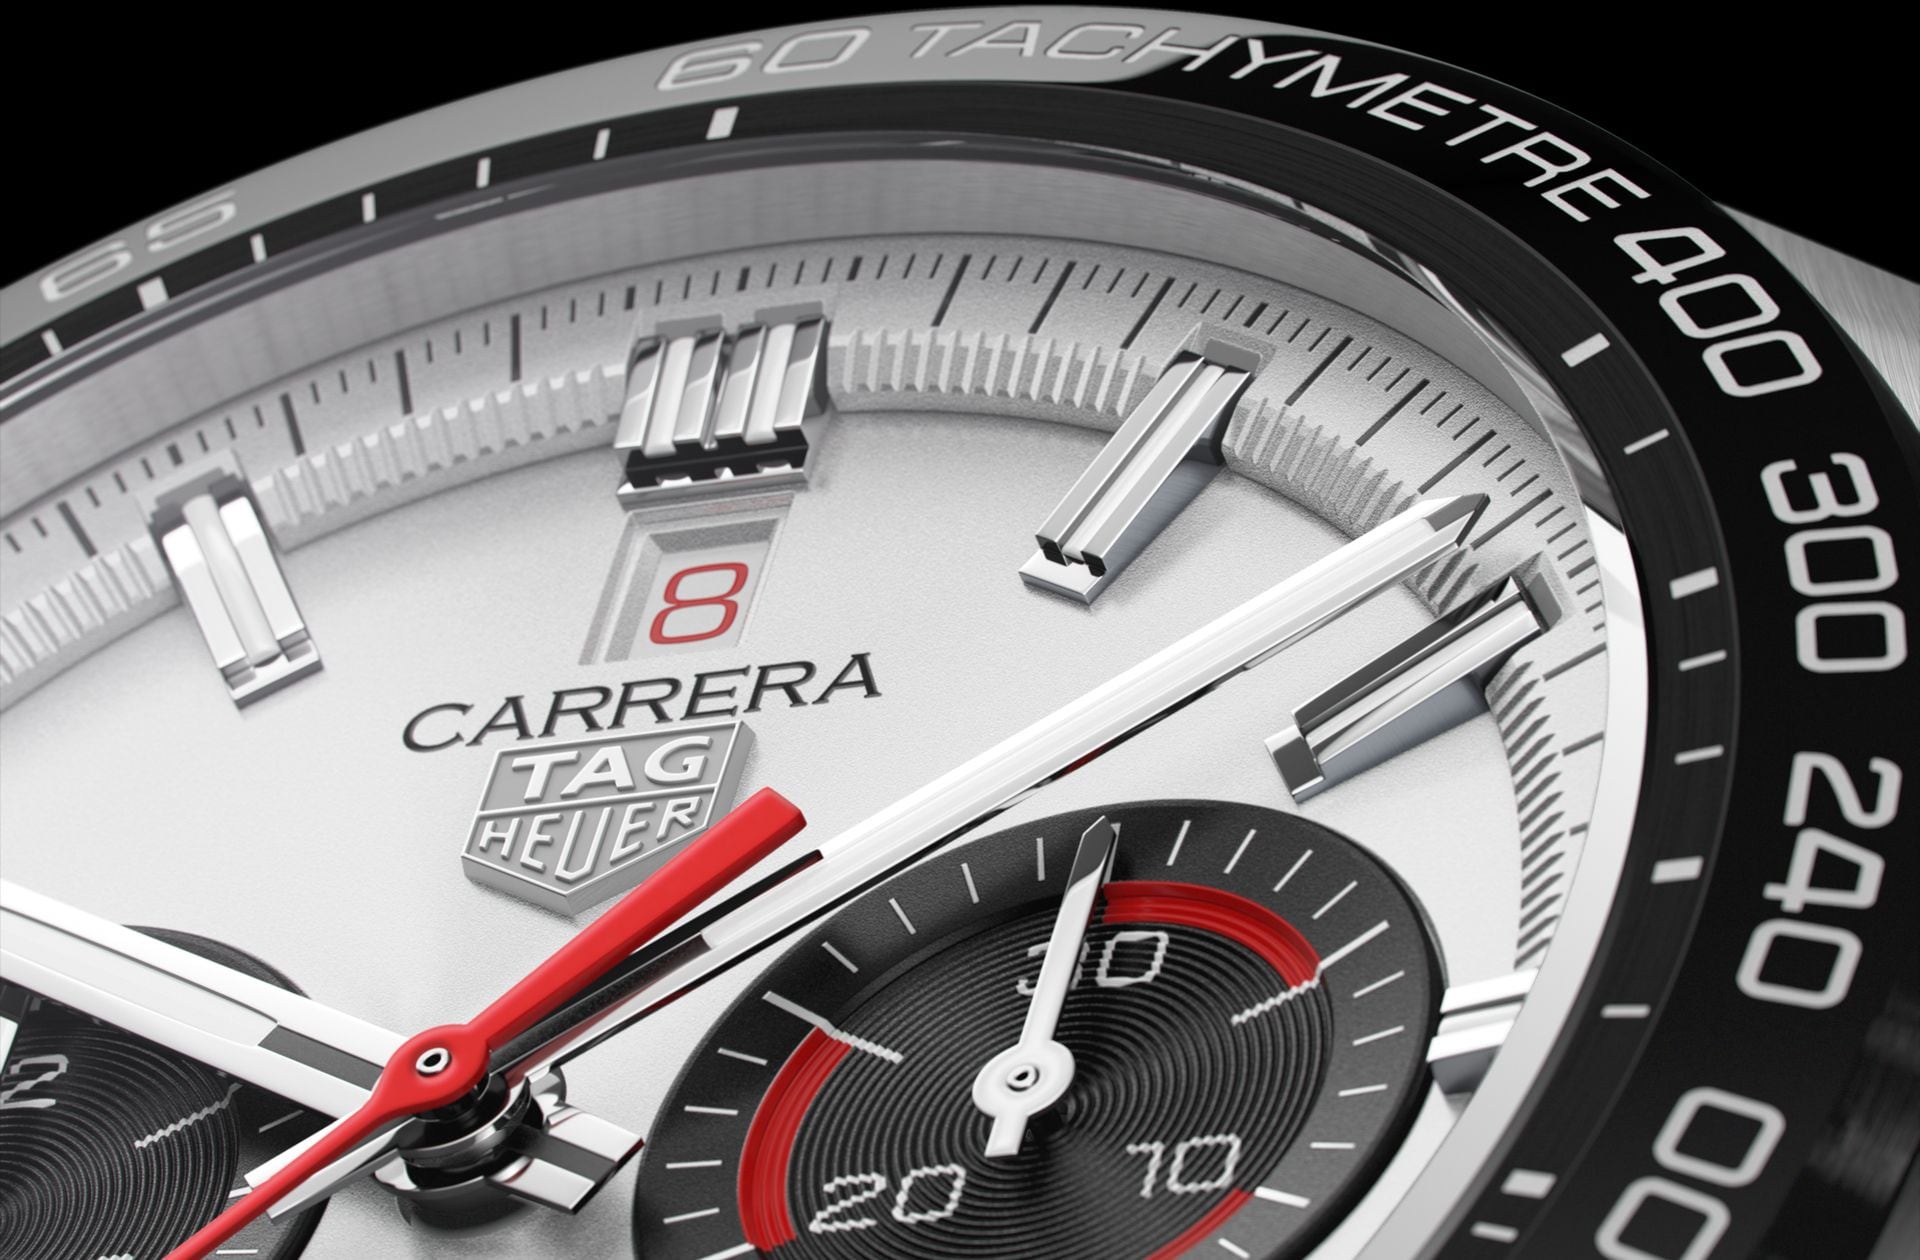 TAG Heuer Carrera Fuji Speedway Limited Production